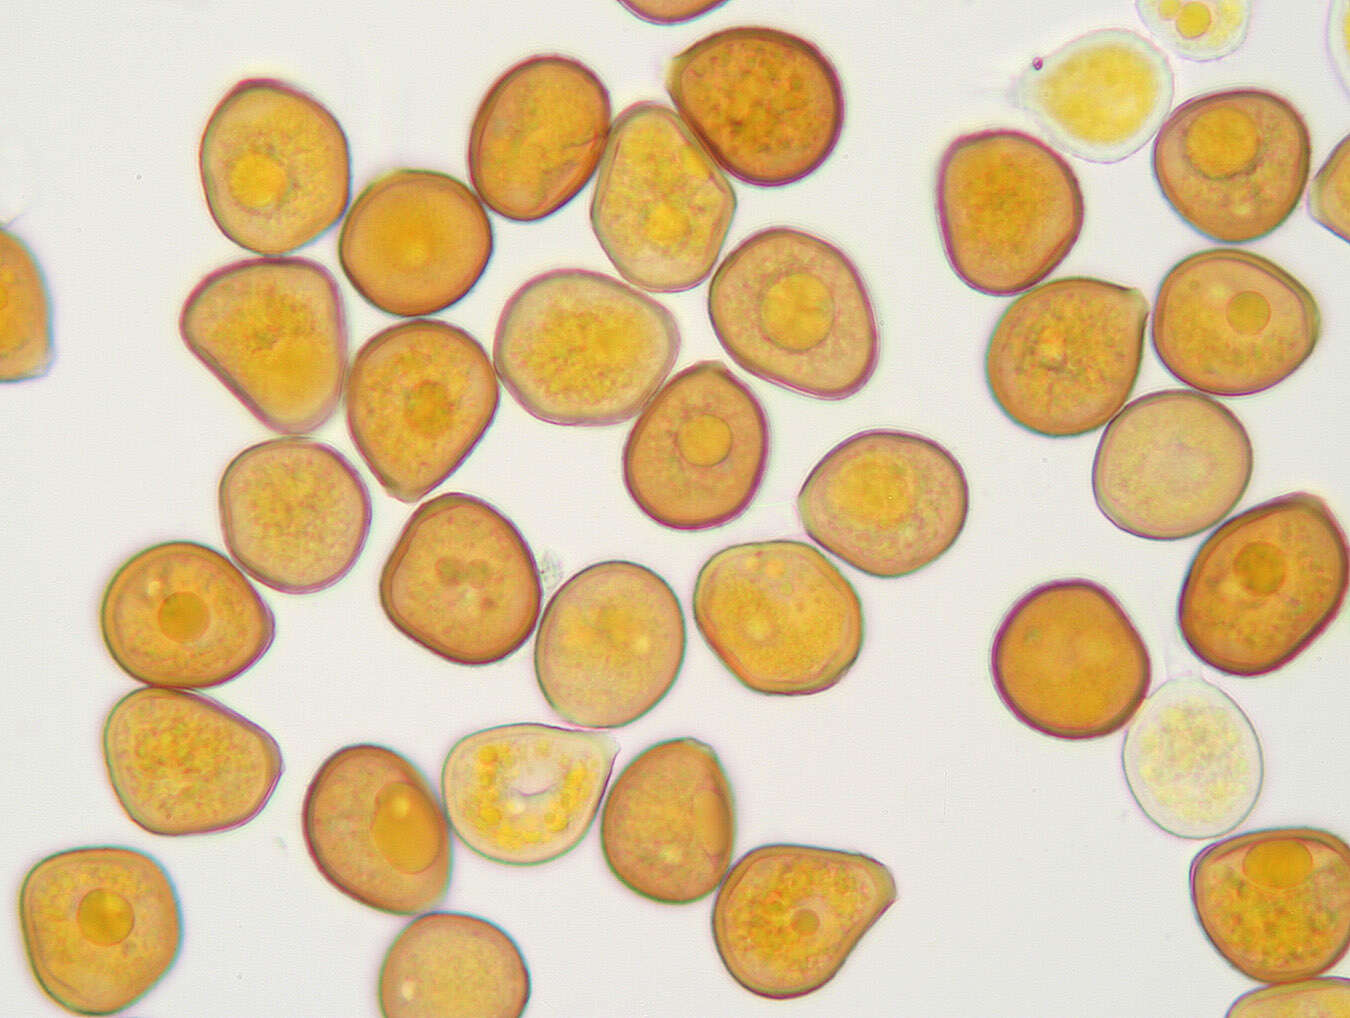 Image of Puccinia hydrocotyles (Mont.) Cooke 1880